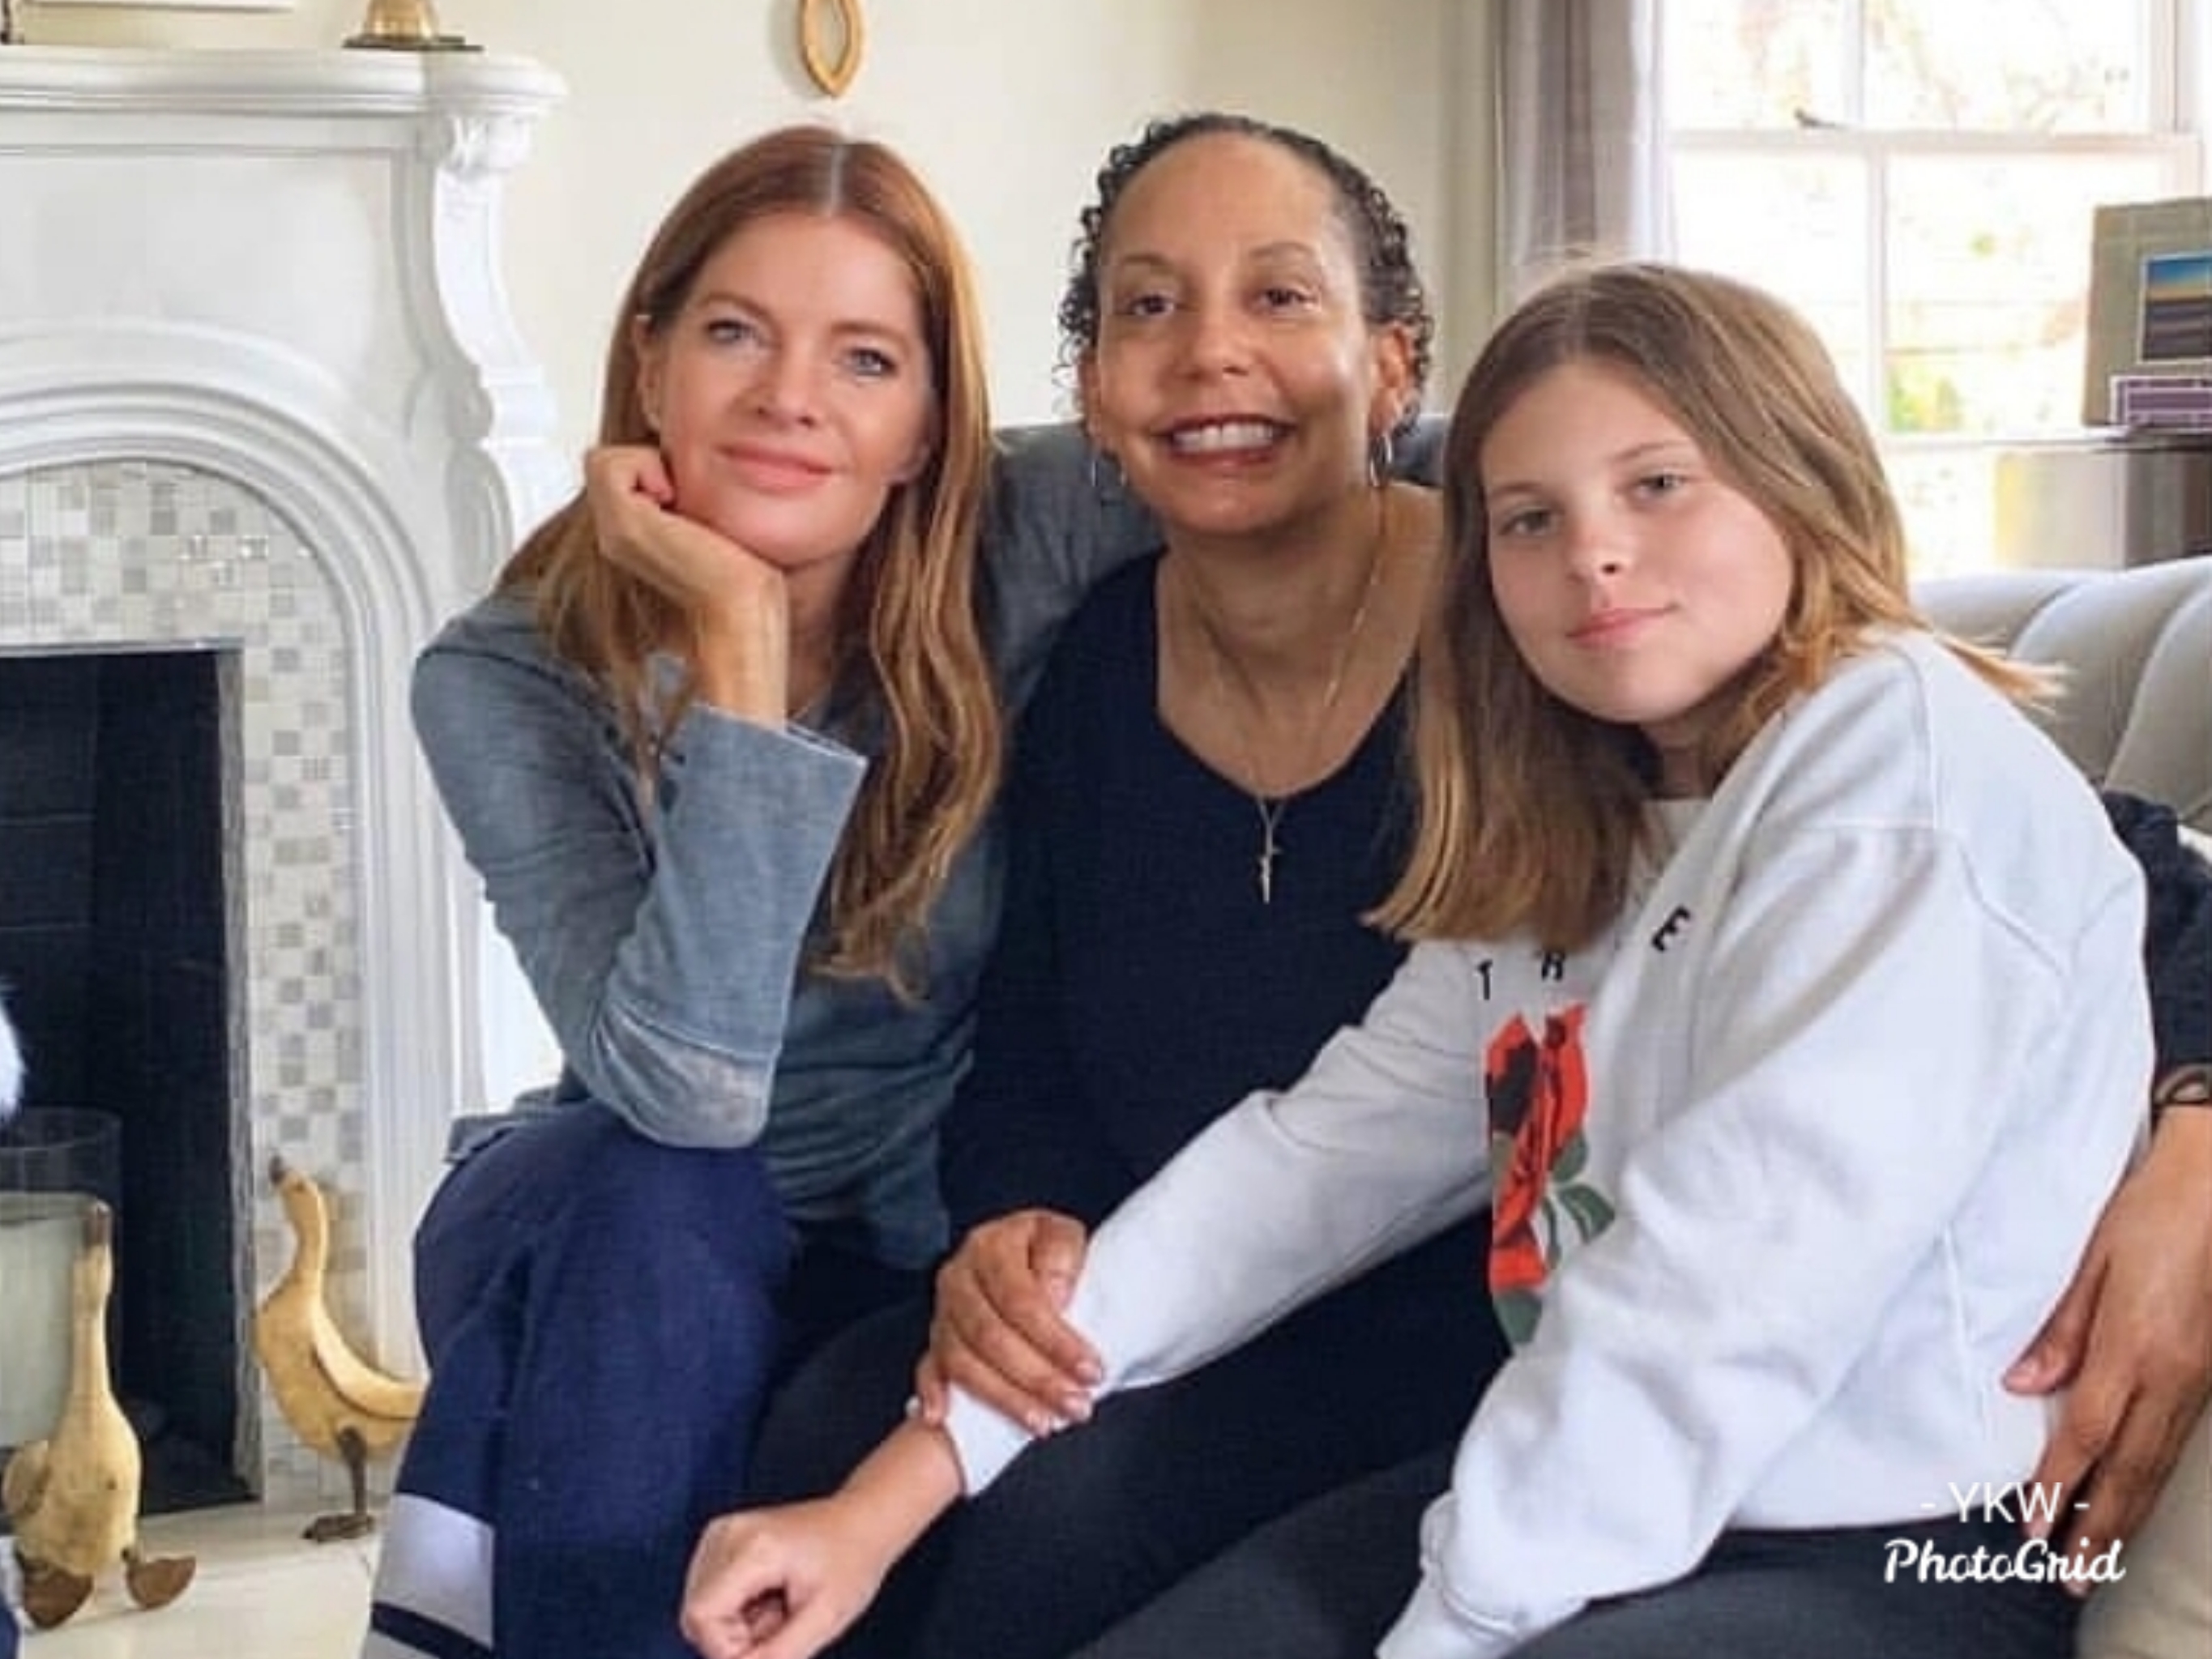 Michelle Stafford’s Surrogate Beat Cancer After Being Told She Only Had A Few Months To Live